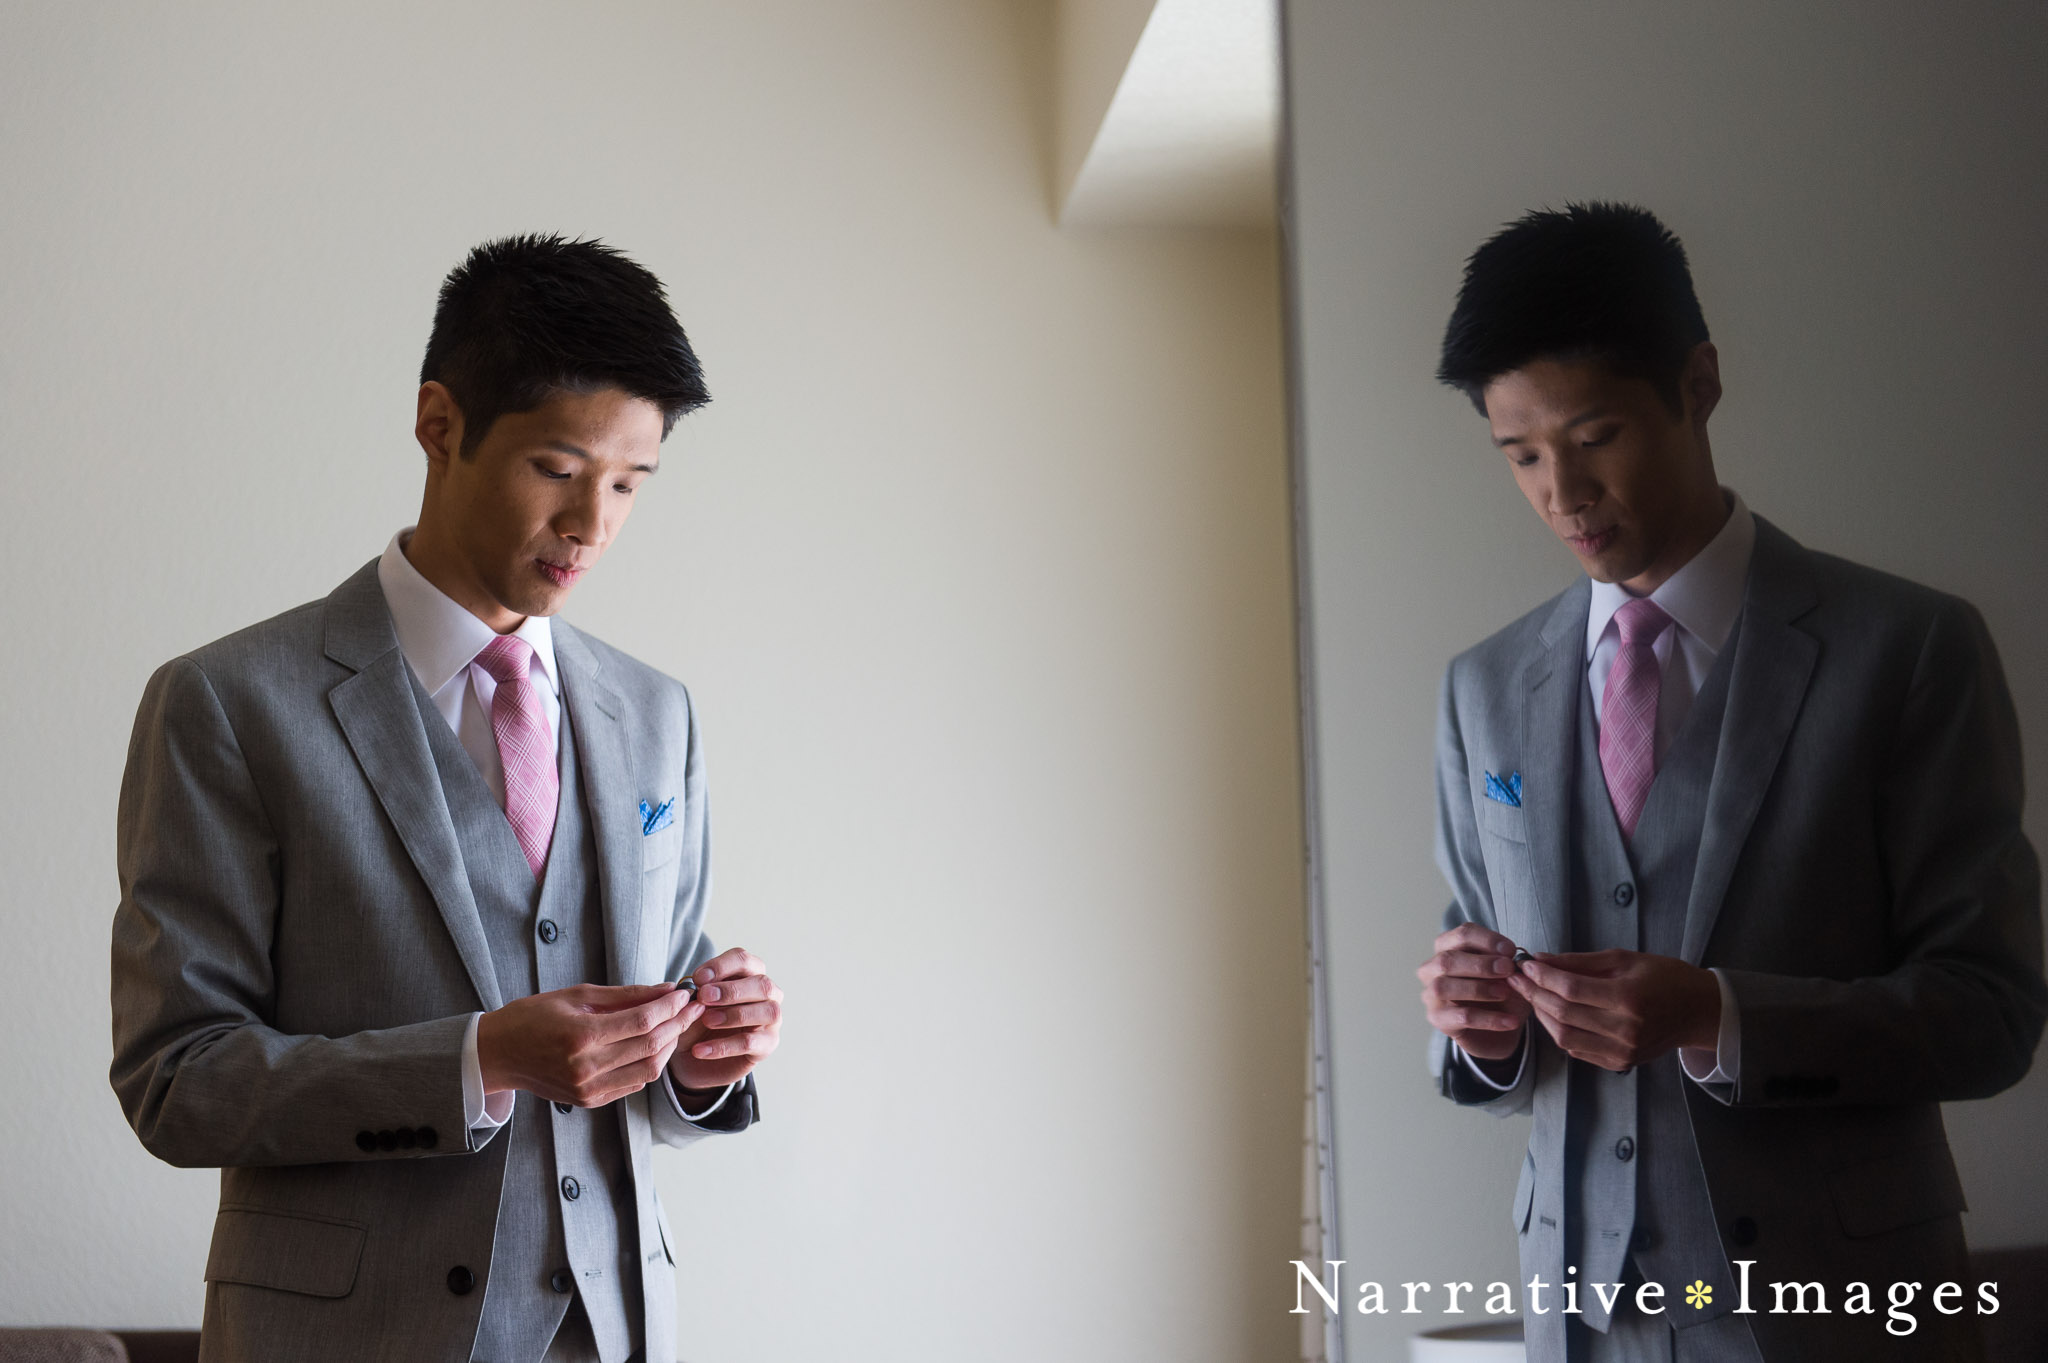 Groom looks down at wedding band dressed in pink tie and grey suit